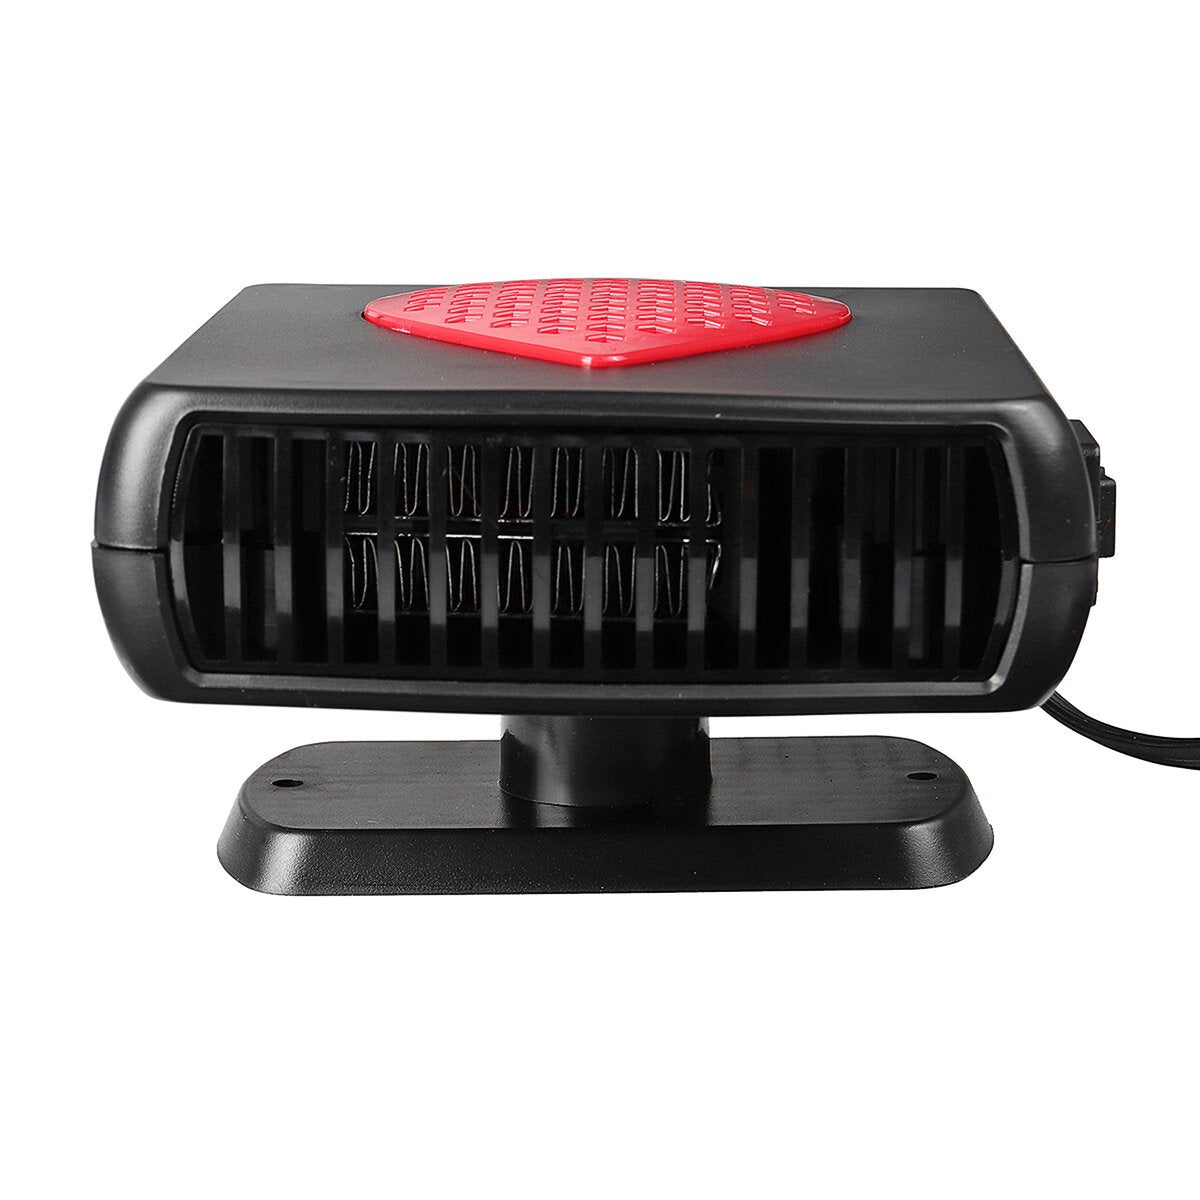 150W Car Heater Heating Cooling Fan Defroster Demister Purify 2 Speeds 360 Rotation Low Noise